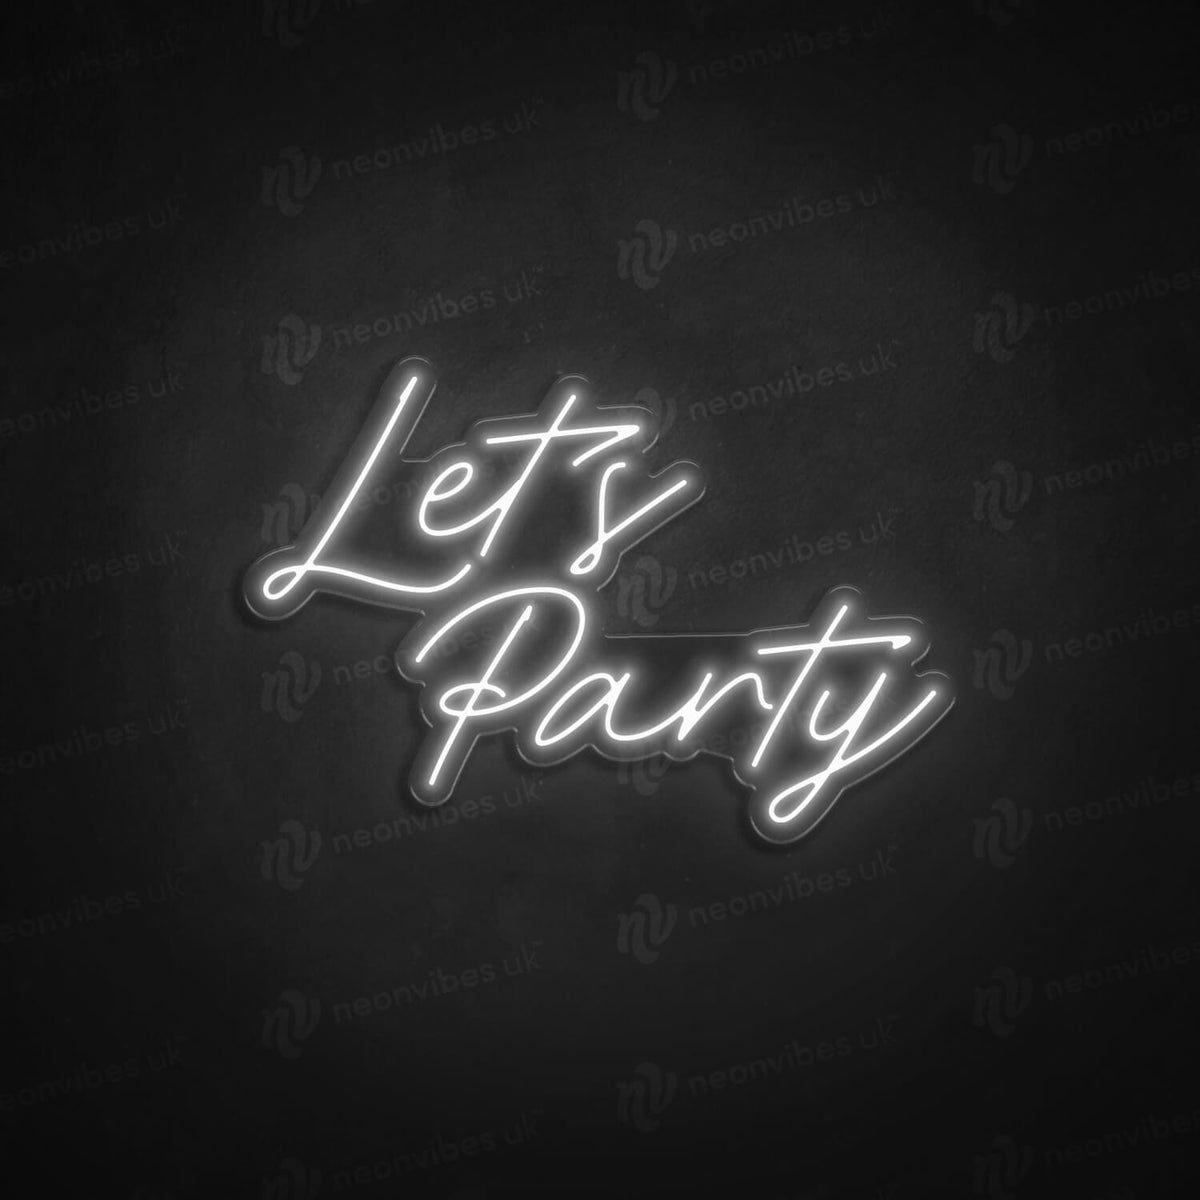 Lets party neon sign